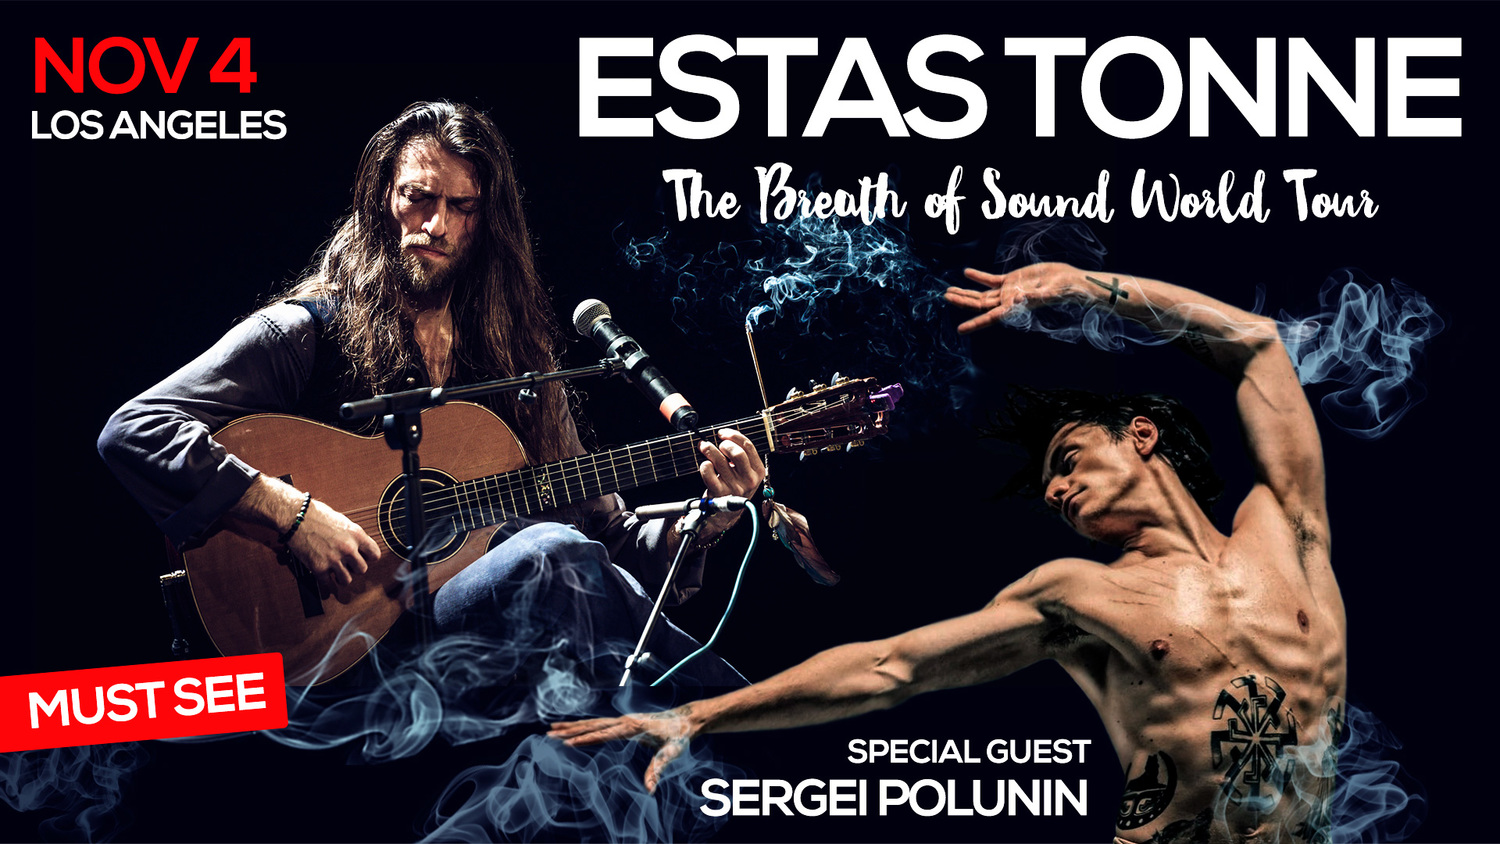 Feature: Master Guitarist Estas Tonne To Share The Stage With Ballet's Superstar Sergey Polunin For The First Time At Wilshire Ebell Theatre 